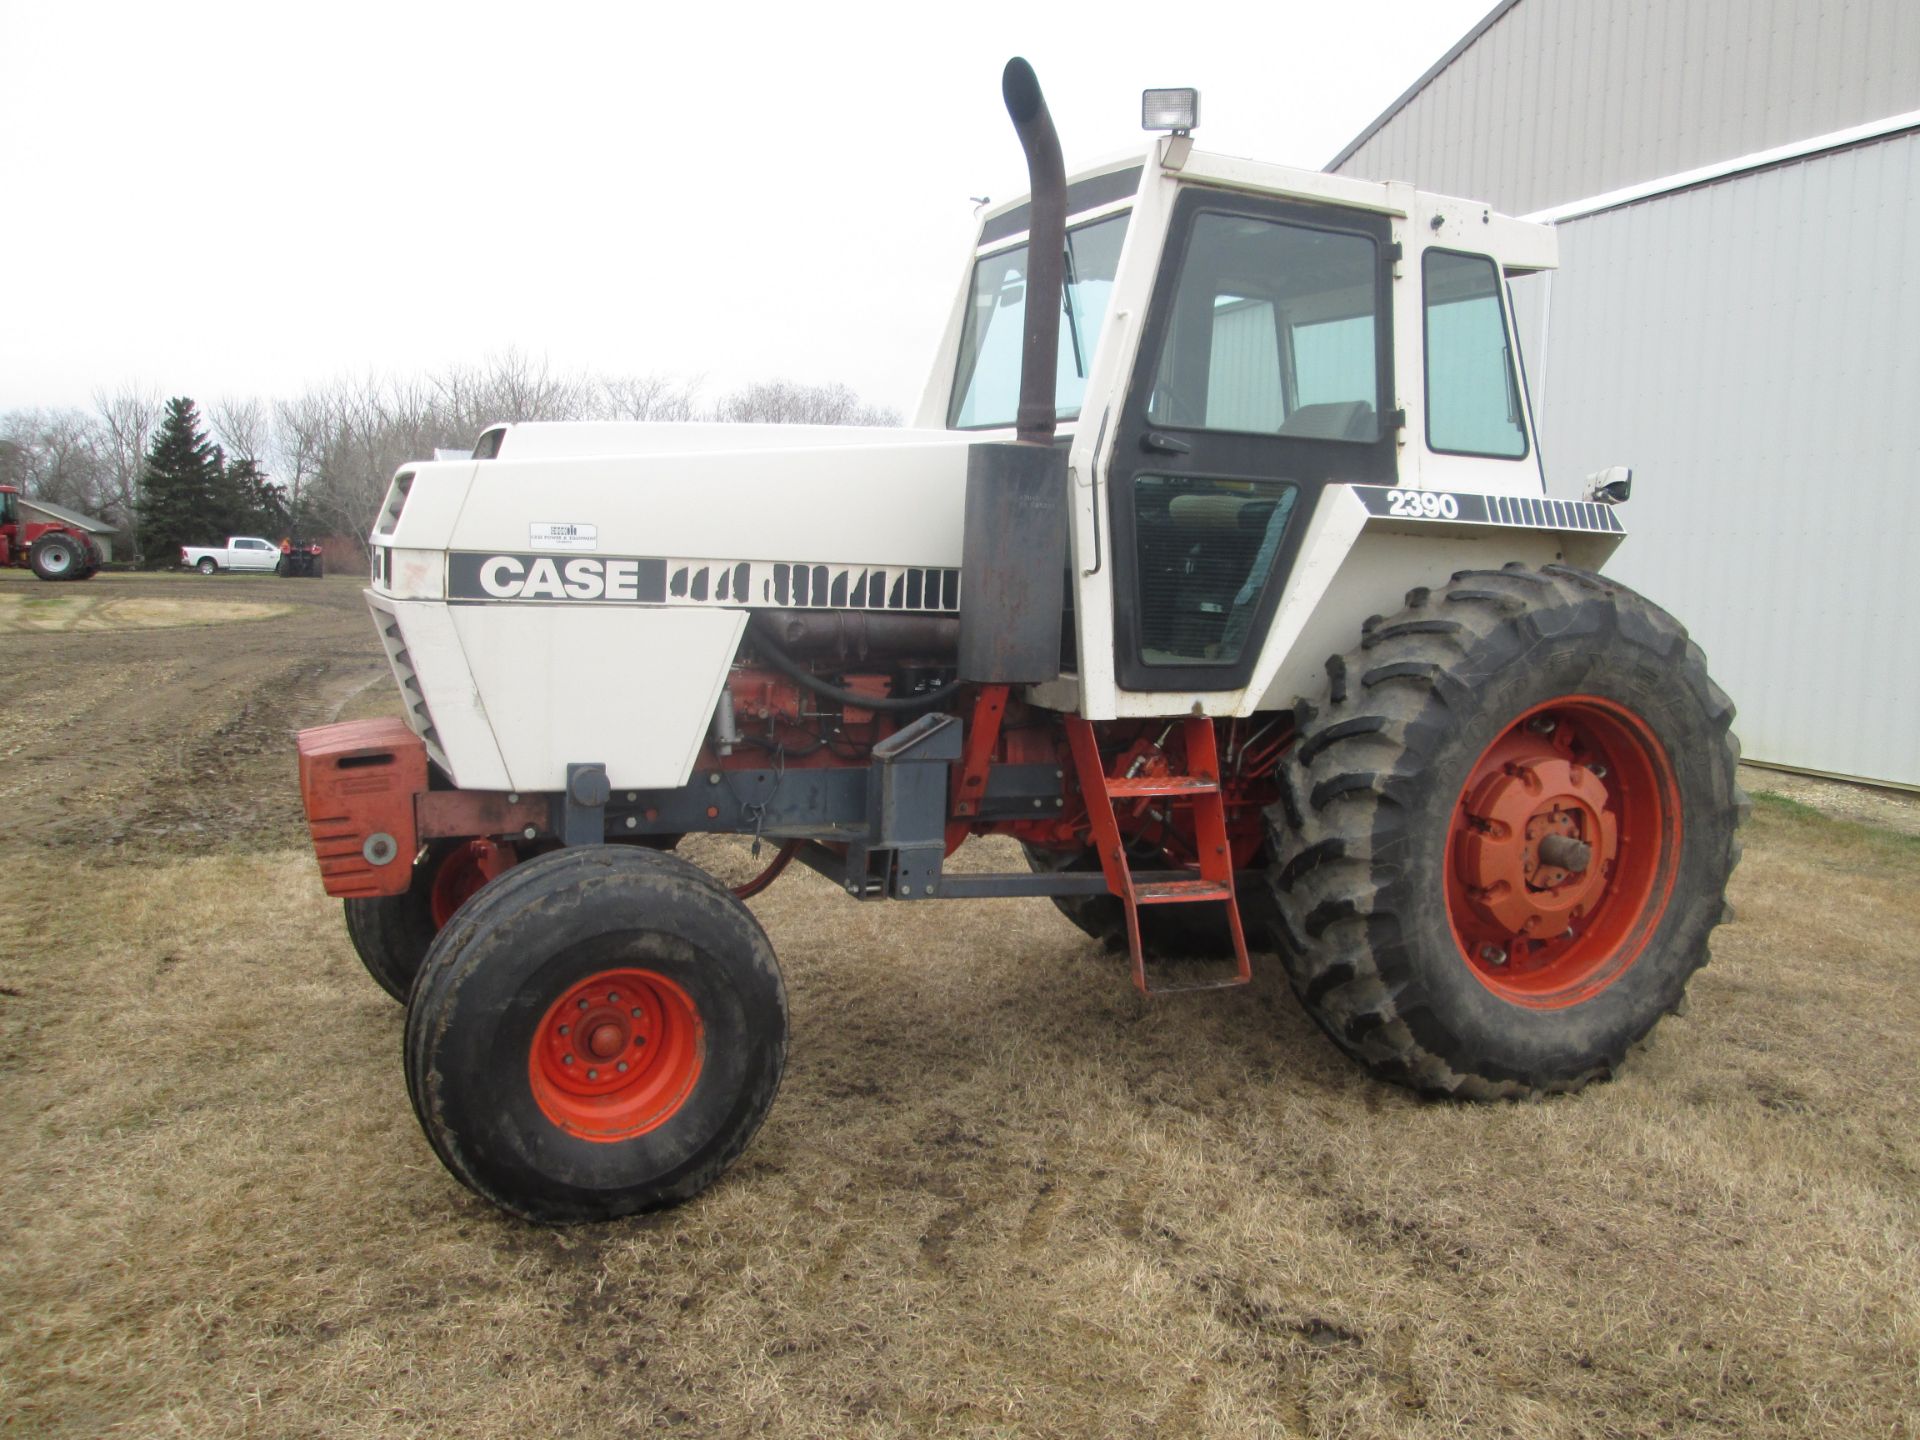 Case 2390 2WD c/w Allied 795 loader, 7' bucket & grapple, showing 6405 hr, 20.8x38 duals, 3 hyd, - Image 2 of 18